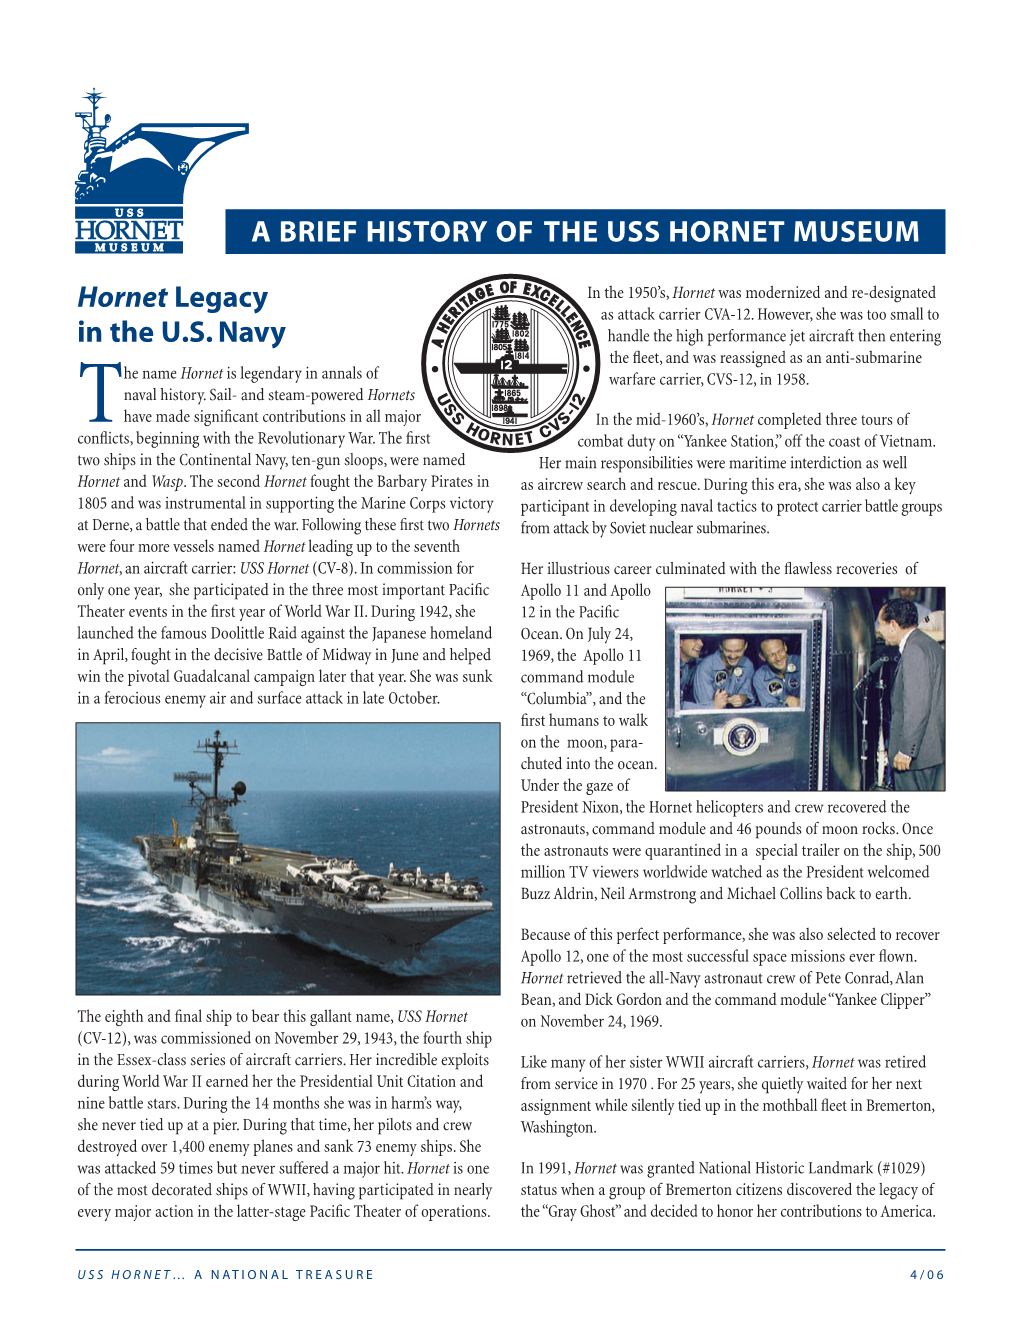 A Brief History of the USS Hornet Museum